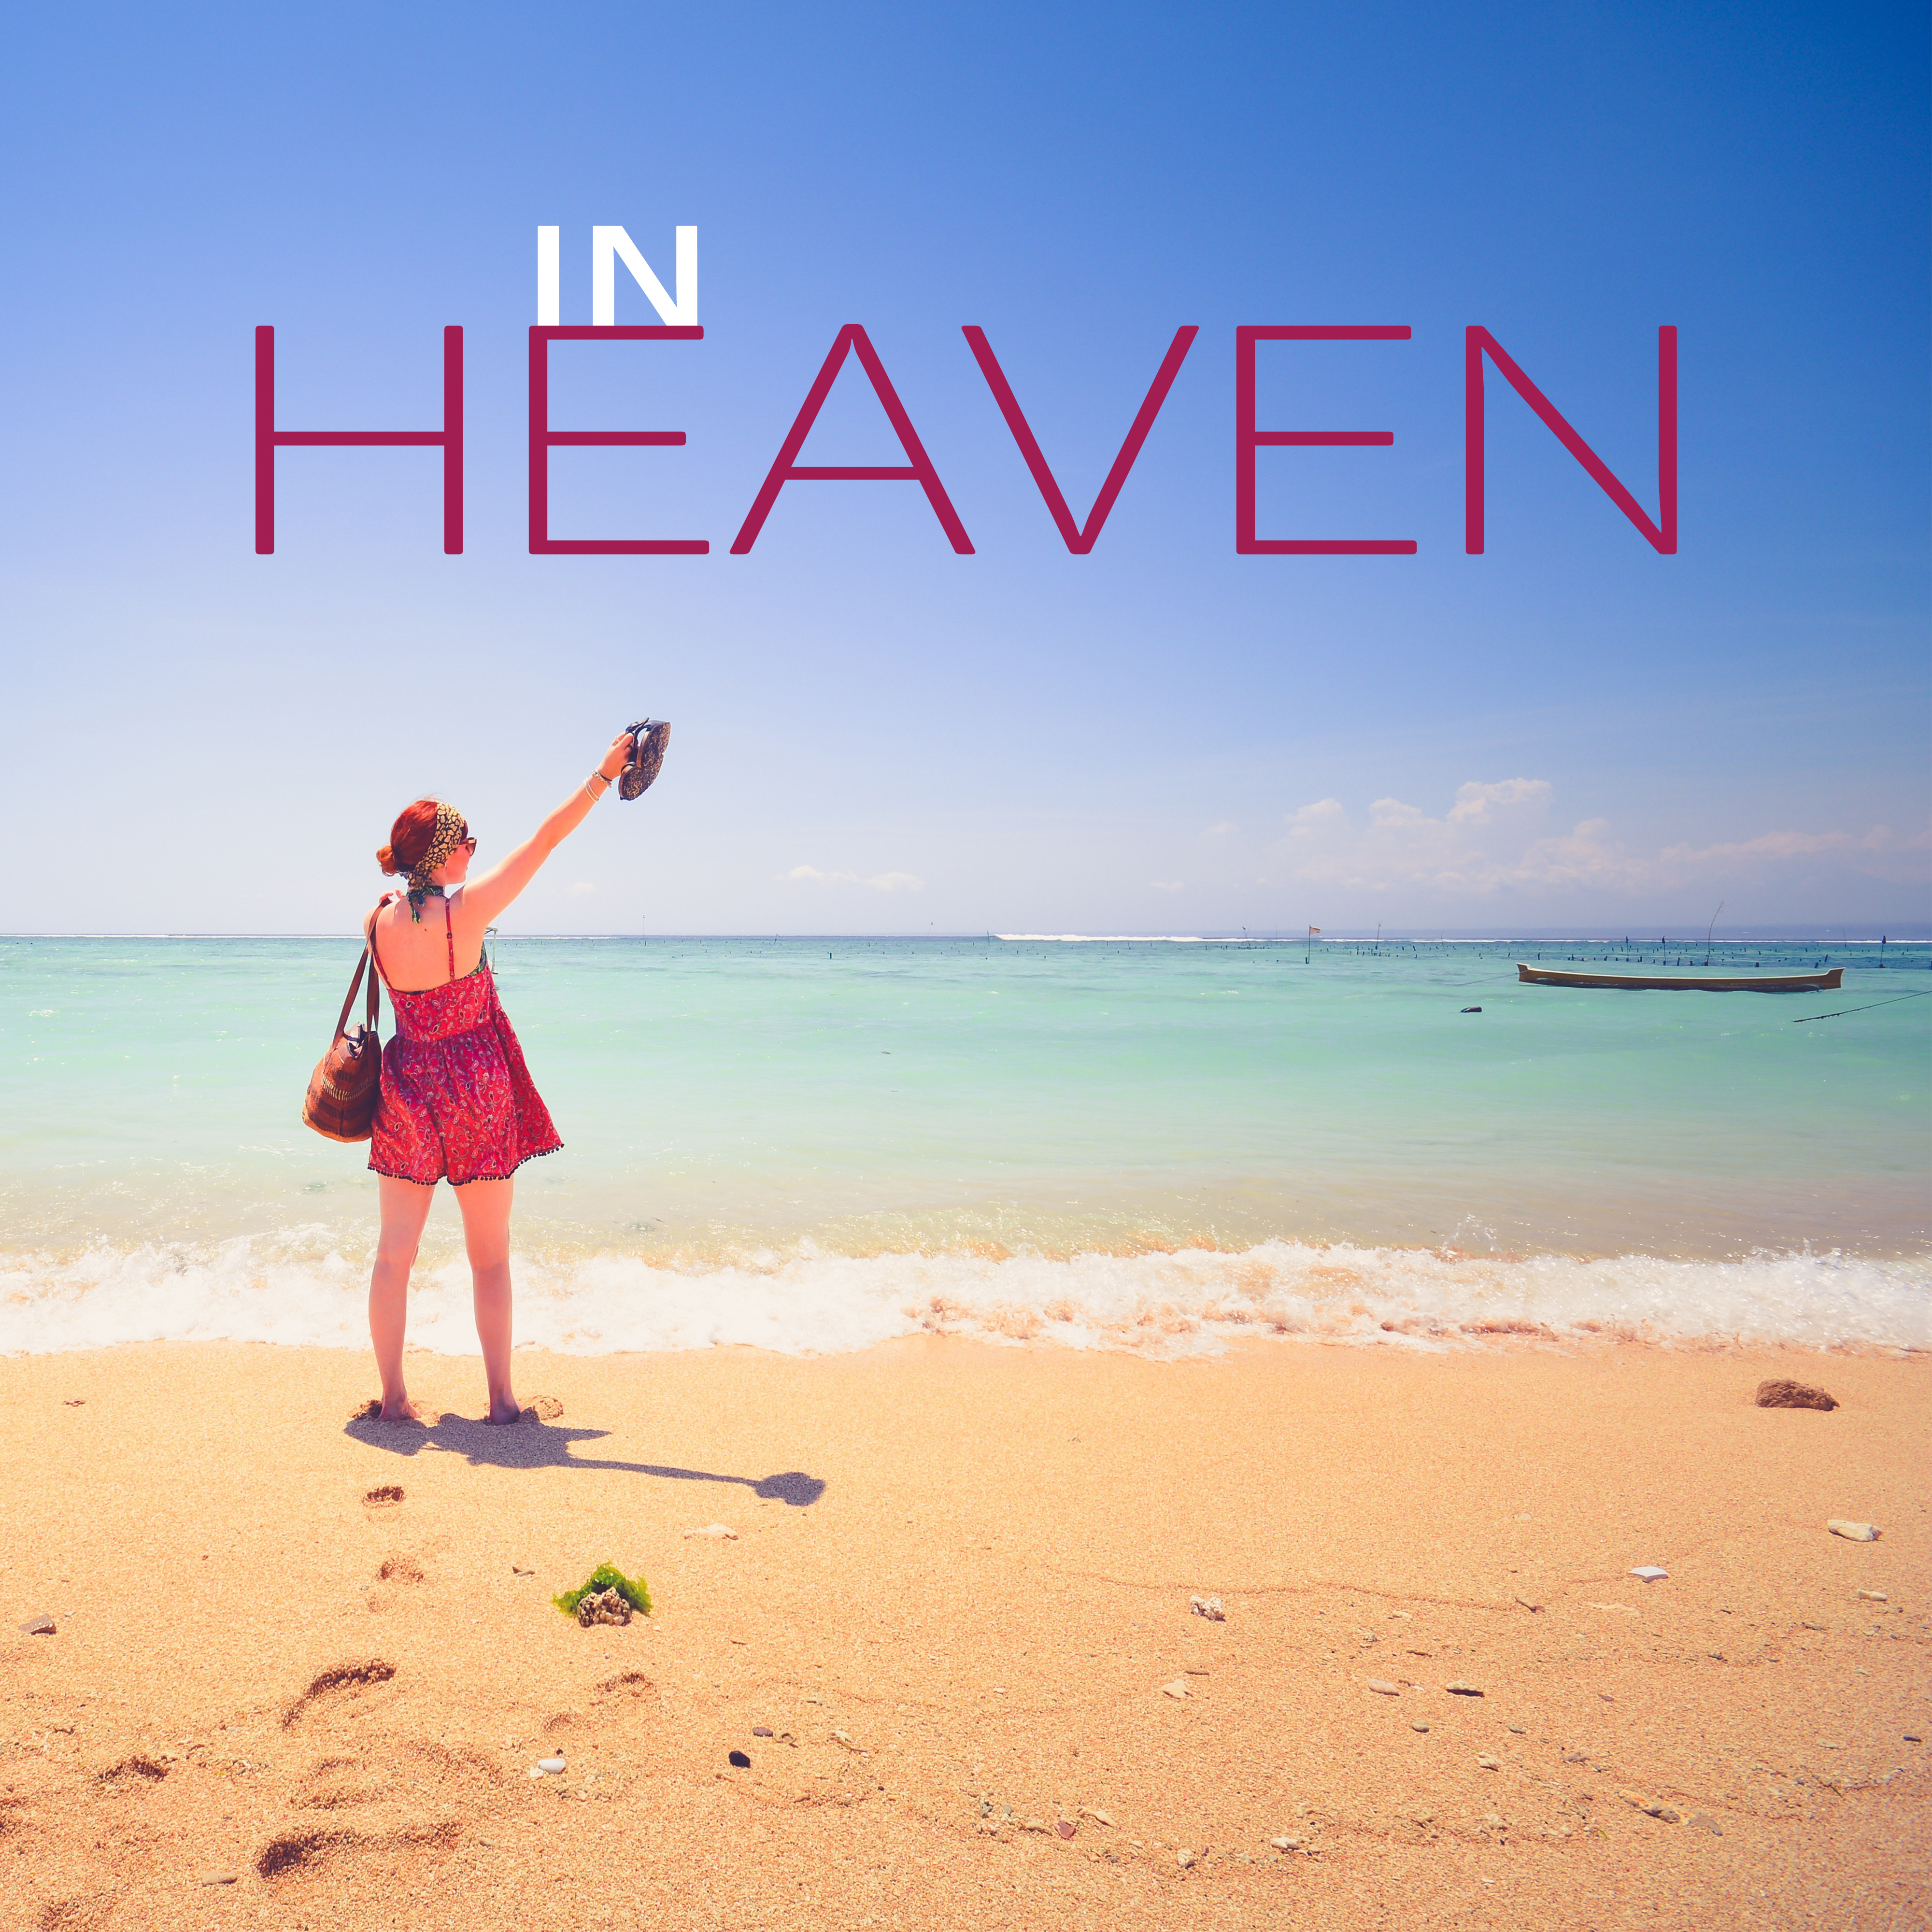 In Heaven  Chill Paradise, Chilled Ibiza, Melodies to Rest, Holiday Music, Relax, Lounge Summer